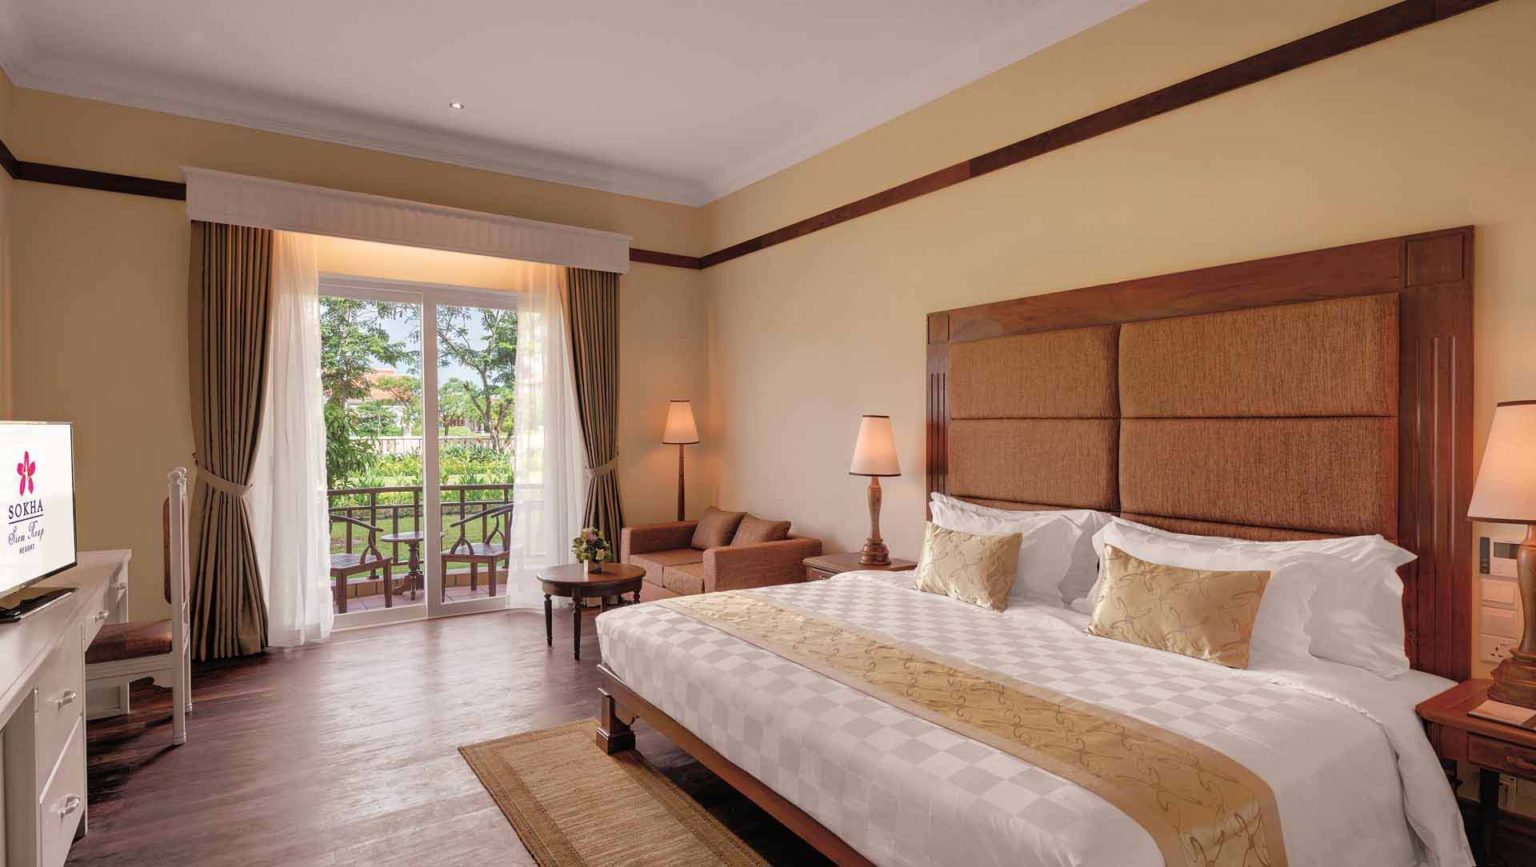 Deluxe king bed room with garden view at the Sokha Siem Reap Resort